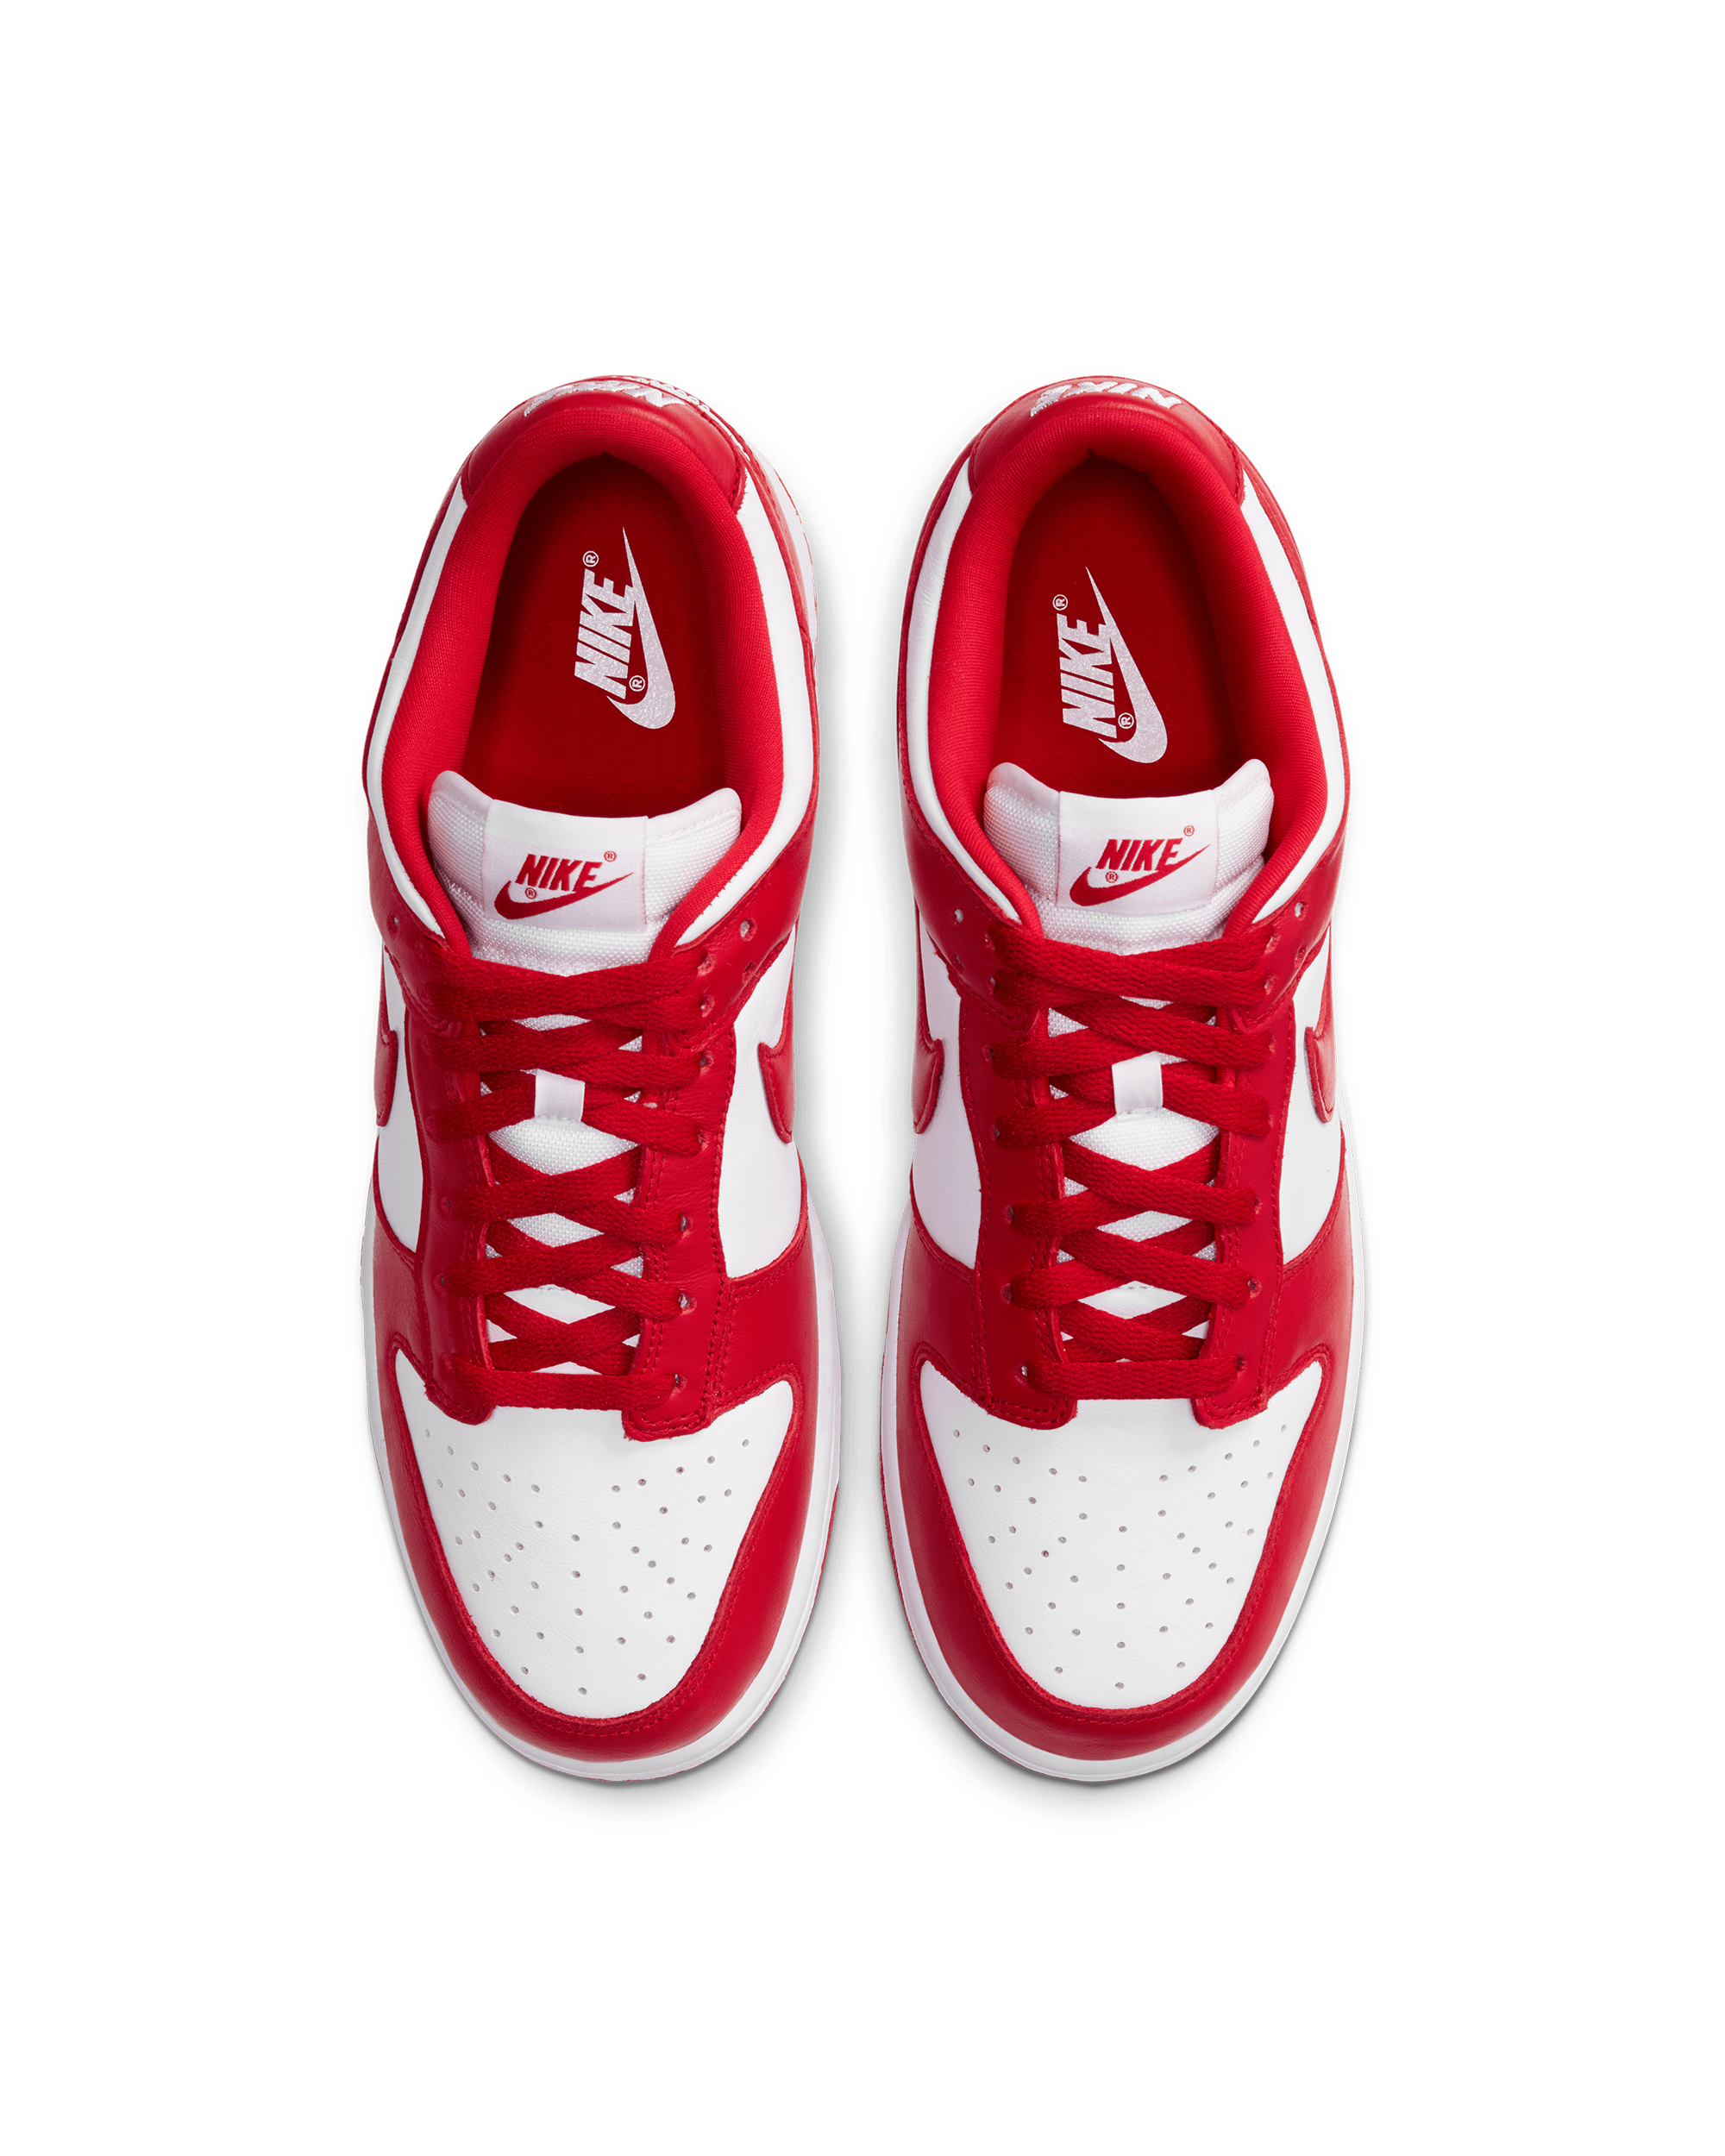 Dunk Low SP “University Red” - WHITE / UNIVERSITY RED